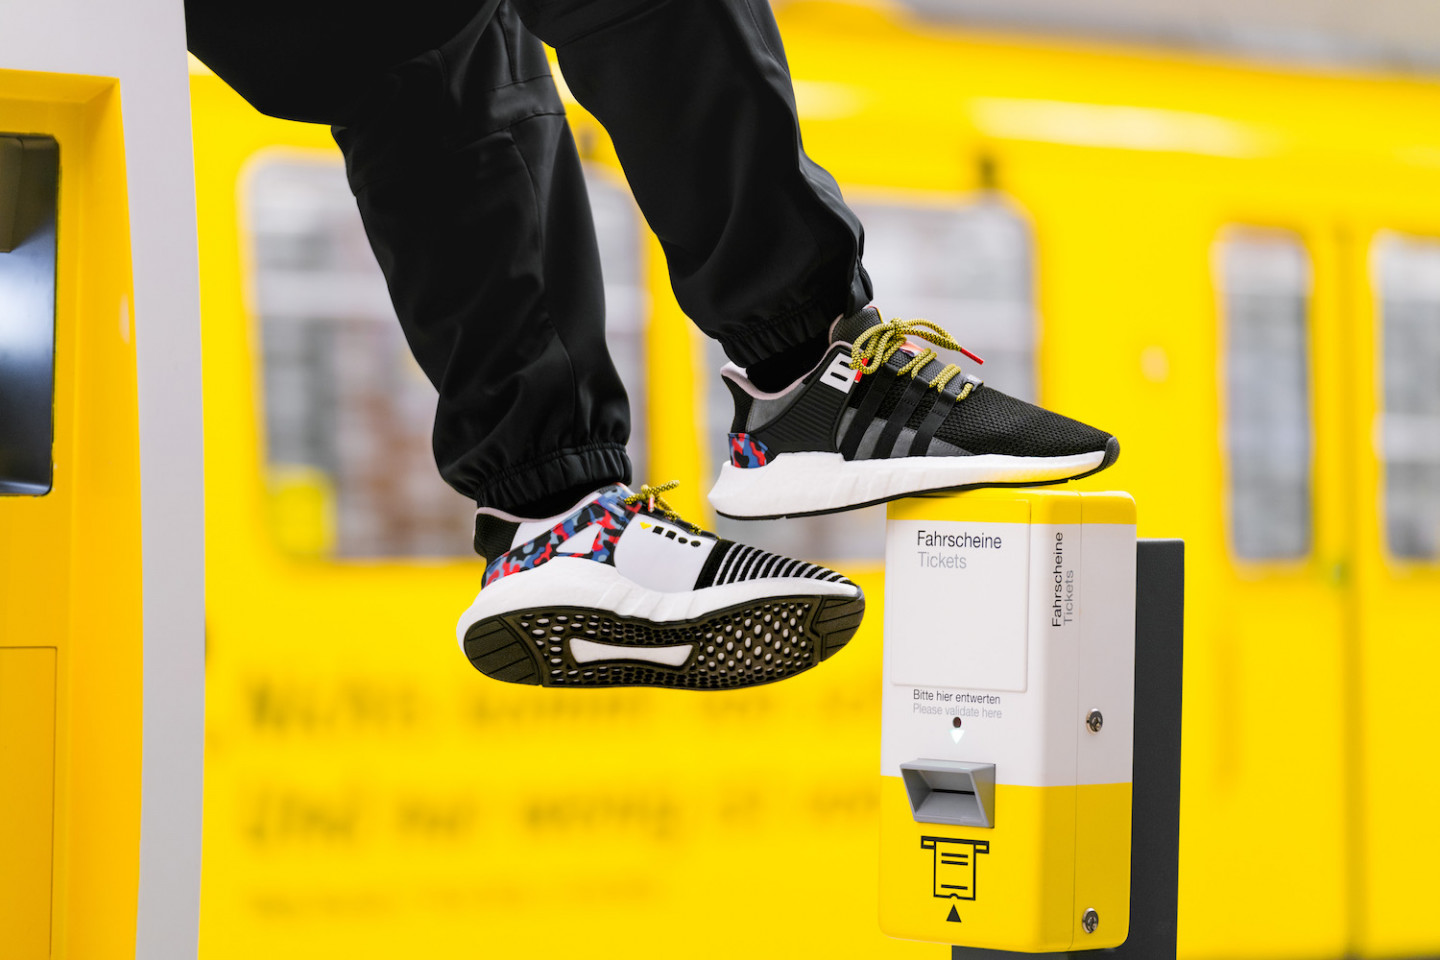 Adidas released smart sneakers with a sewn travel card in public transport